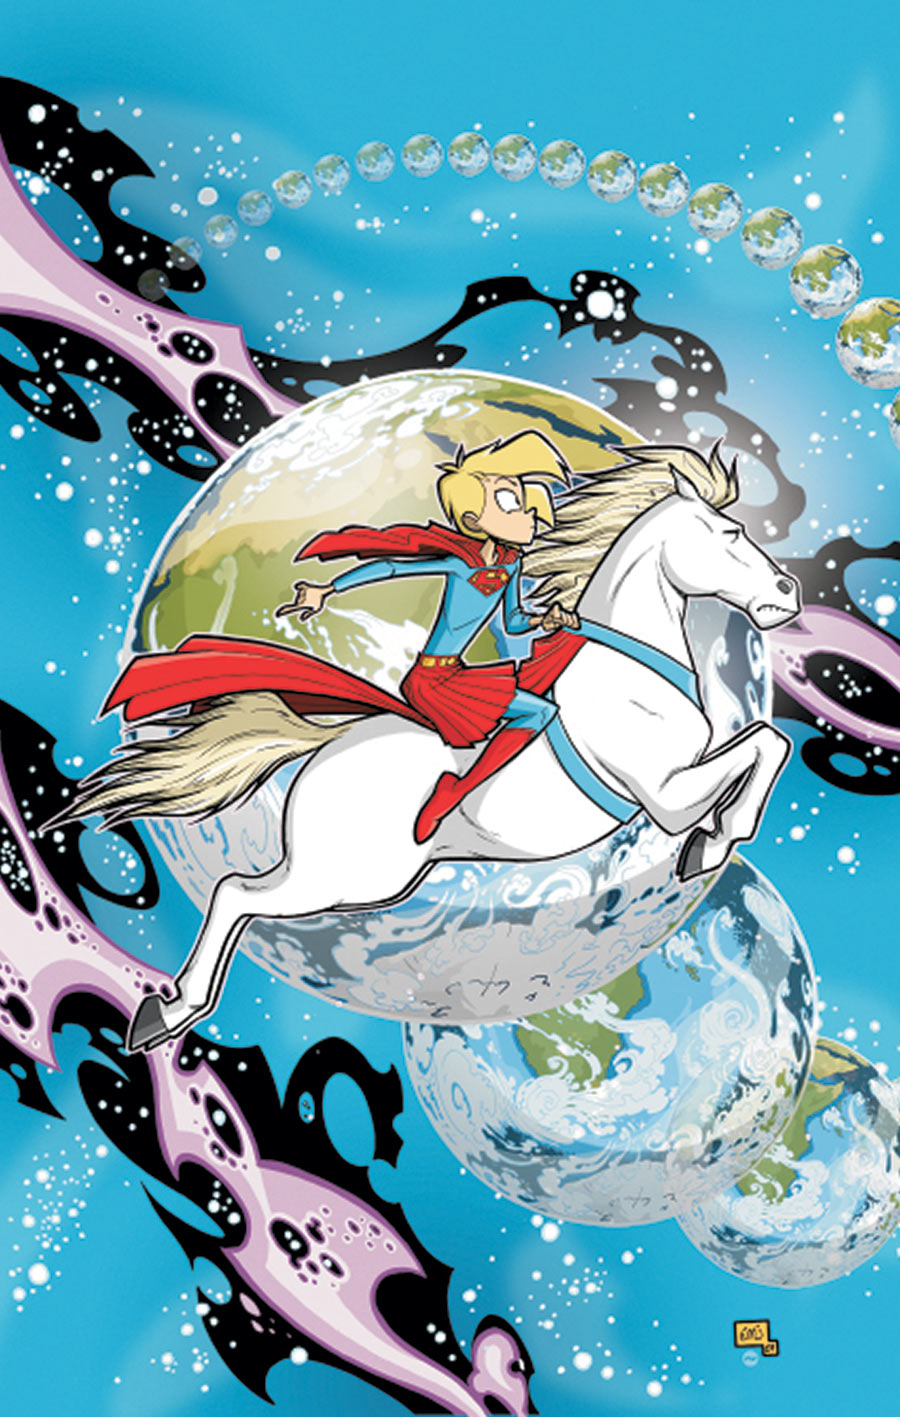 SUPERGIRL: COSMIC ADVENTURES IN THE EIGHTH GRADE #6